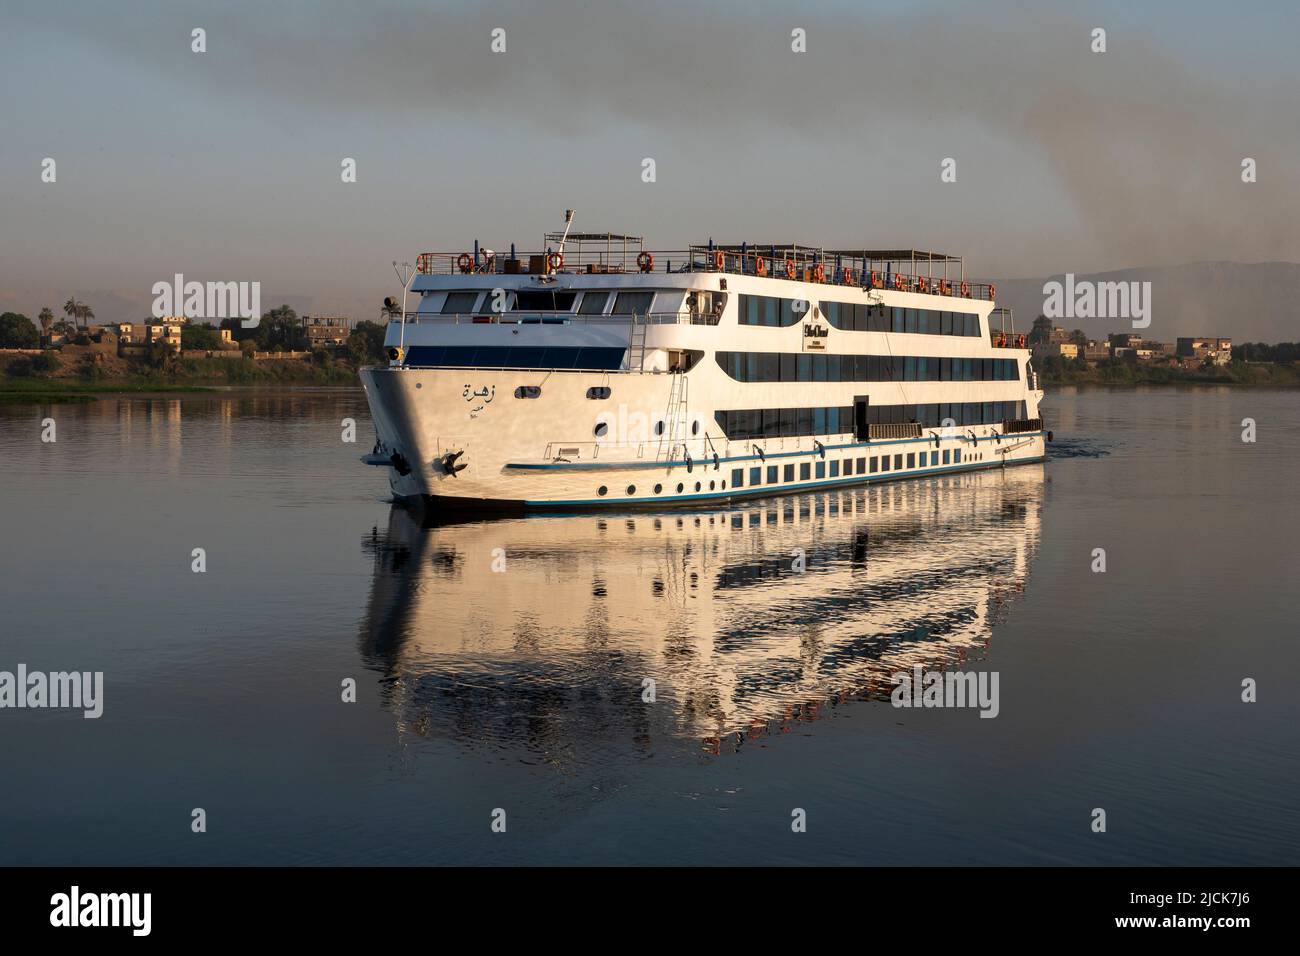 Nile cruise boat sailing on the calm water with reflections in early morning light Stock Photo